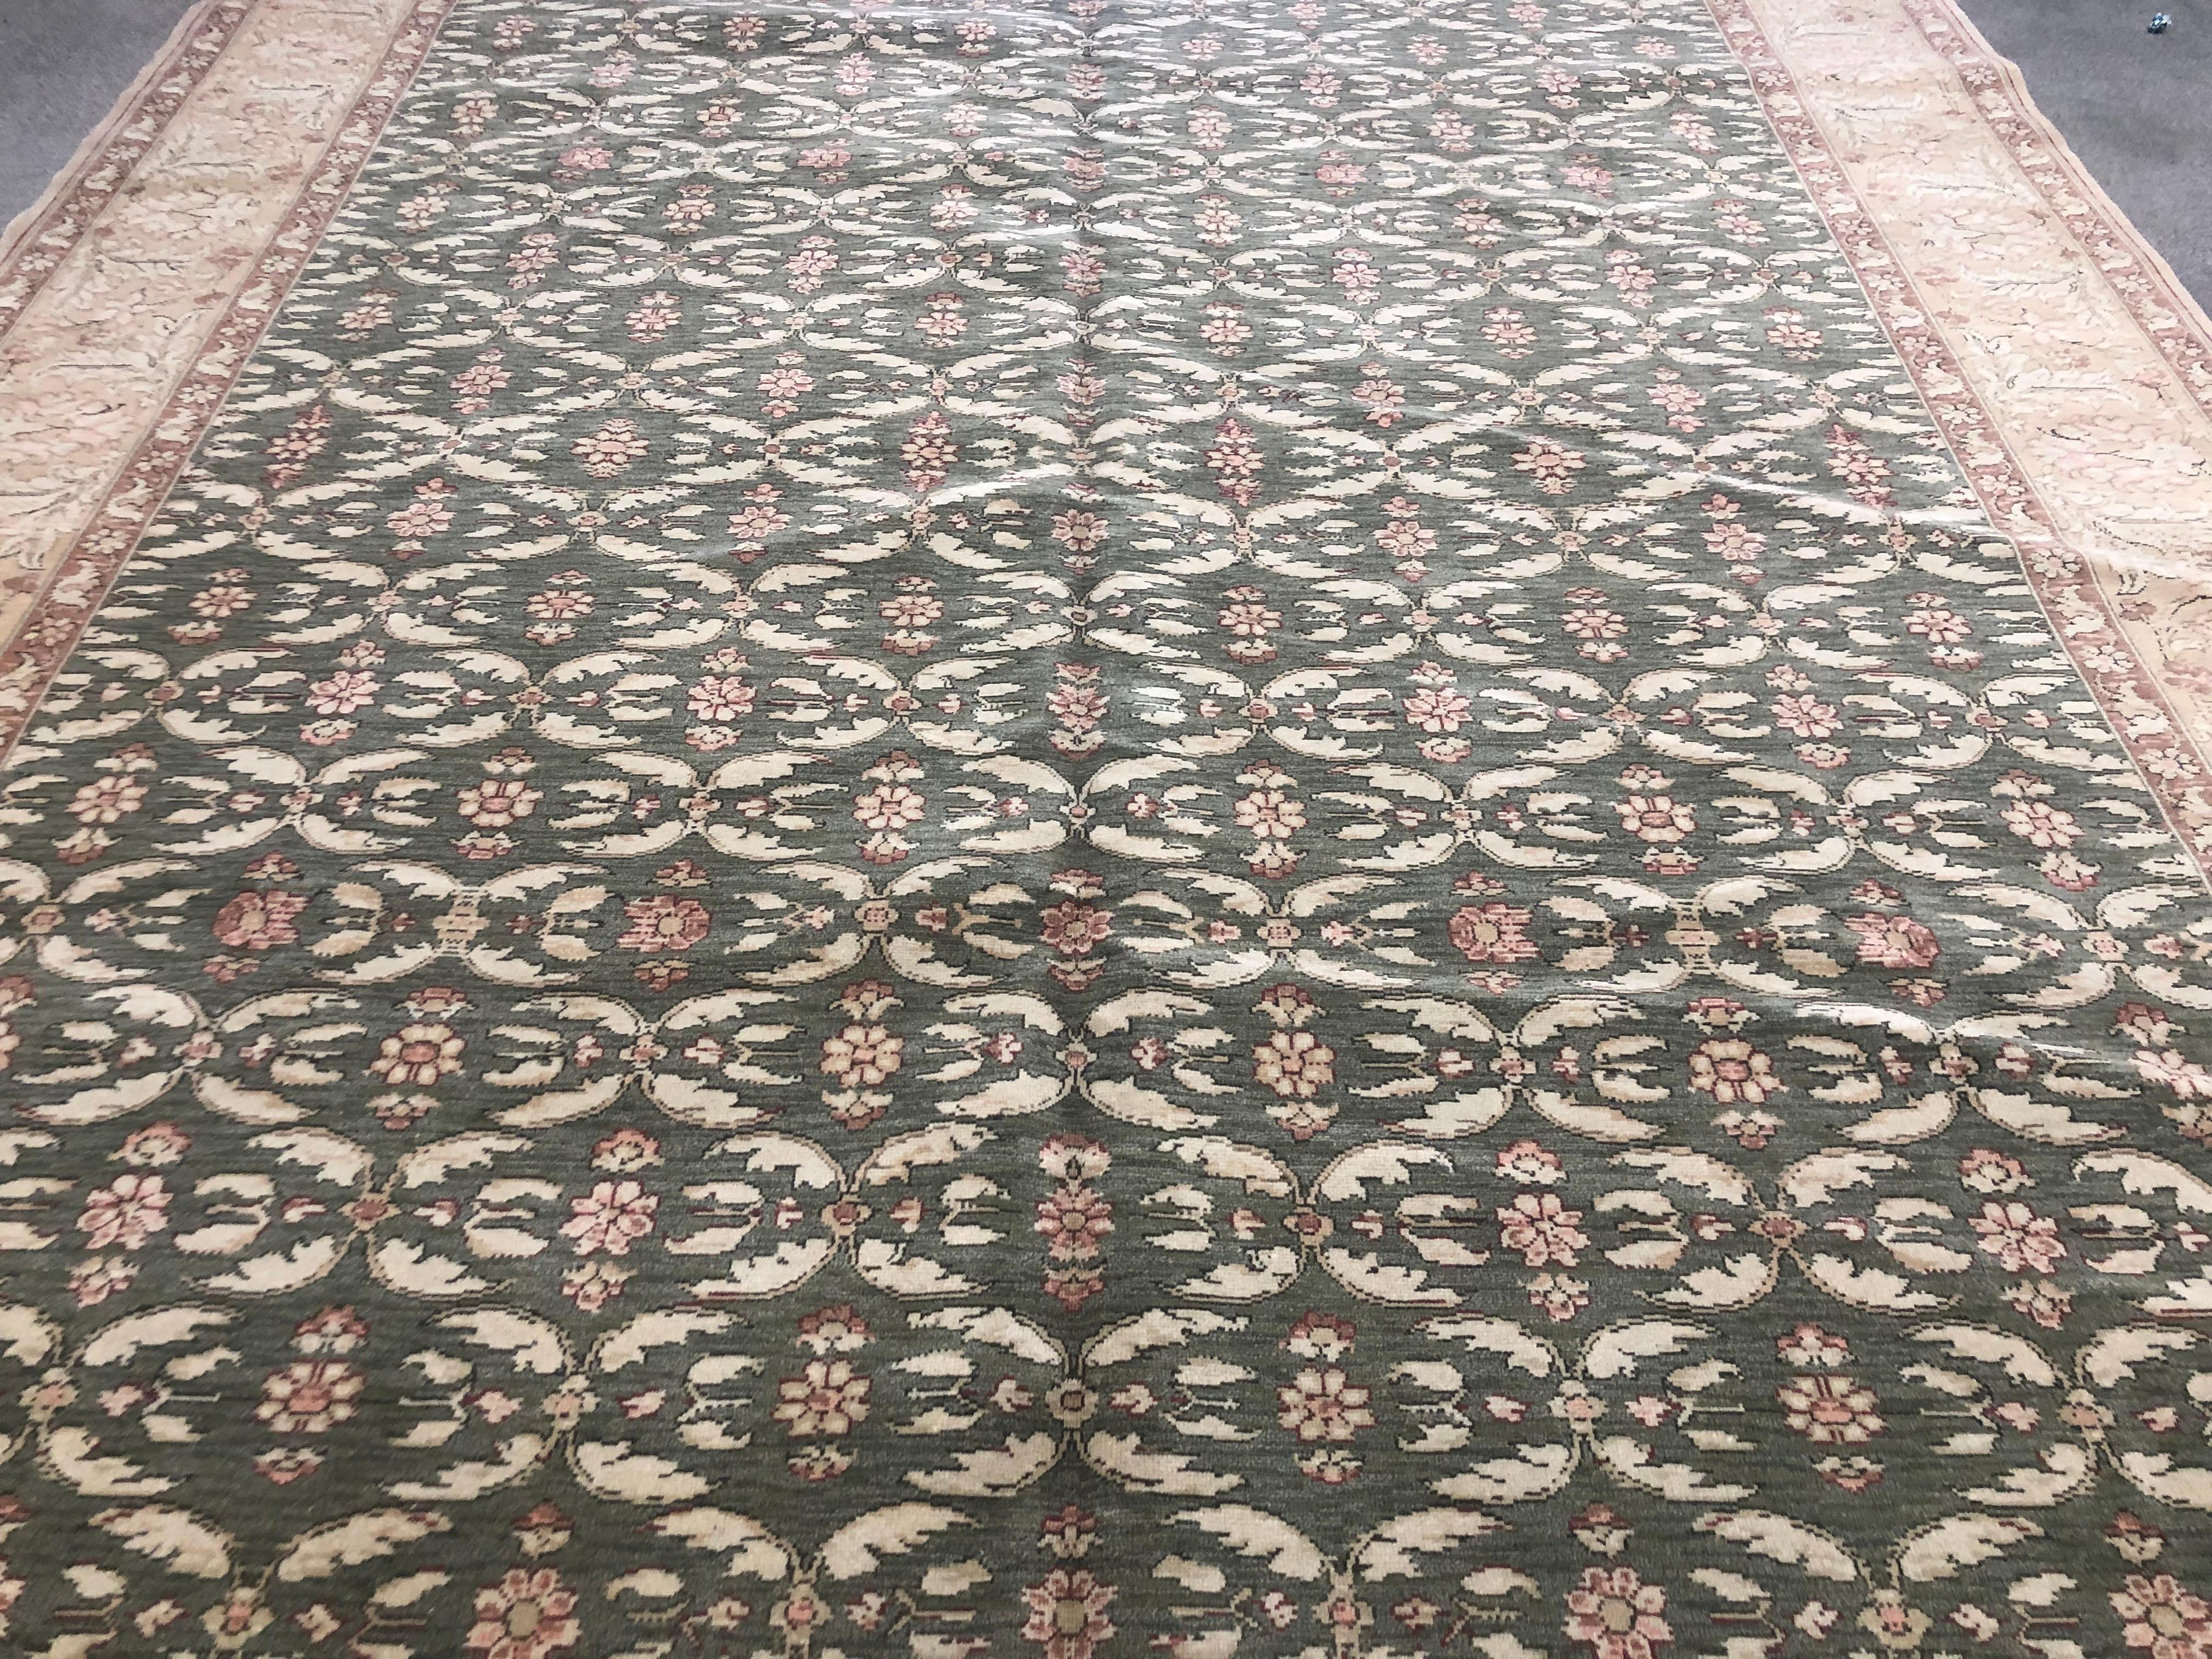 A cream and pink lattice of flowers stands out against a green 'grass' background in this endearing wool area rug. A beige floral border and red floral ribbons frame the image. Hand knotted wool.